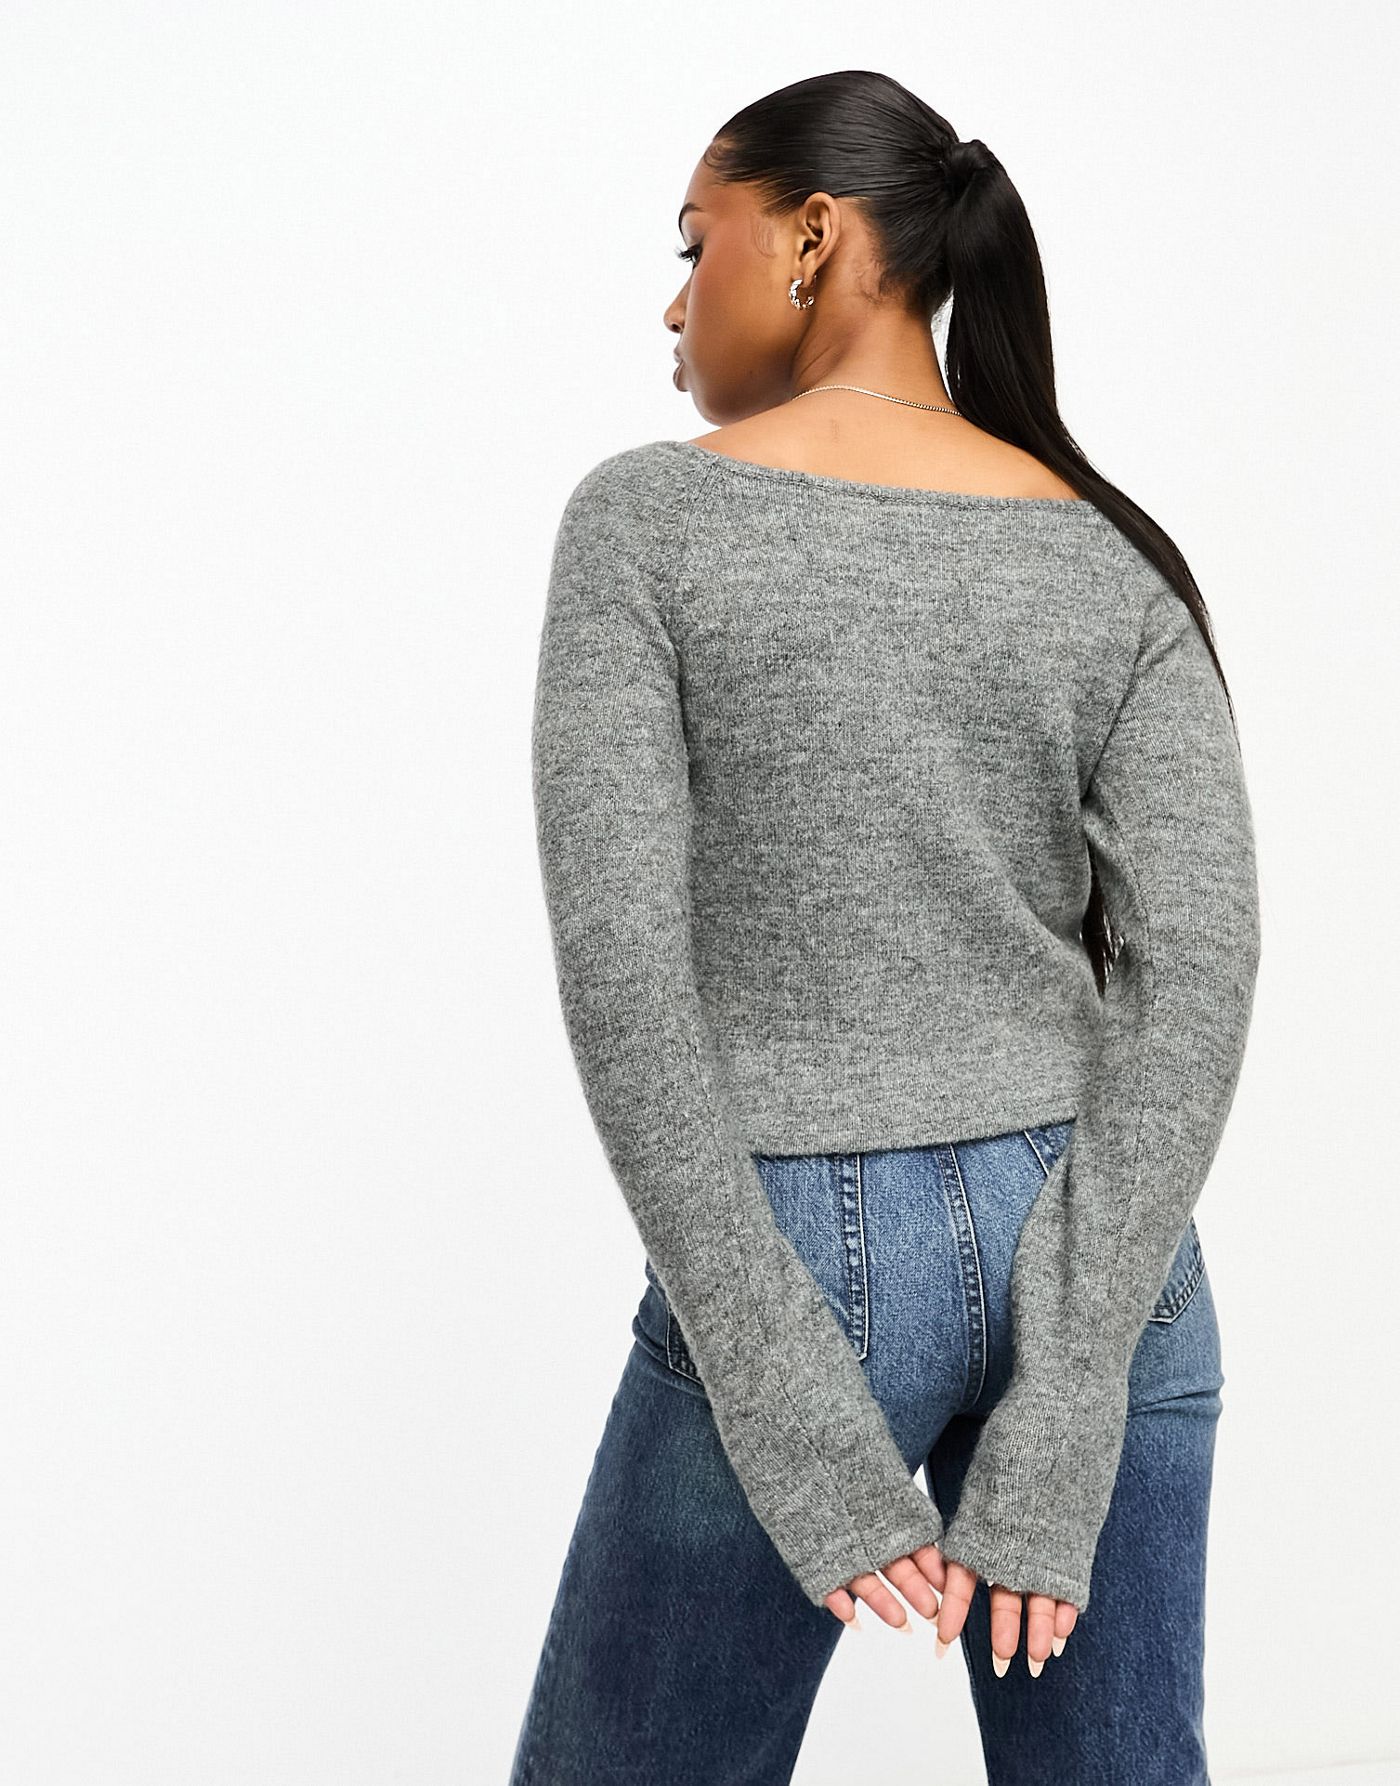 Monki knitted long sleeve boat neck top in grey marl